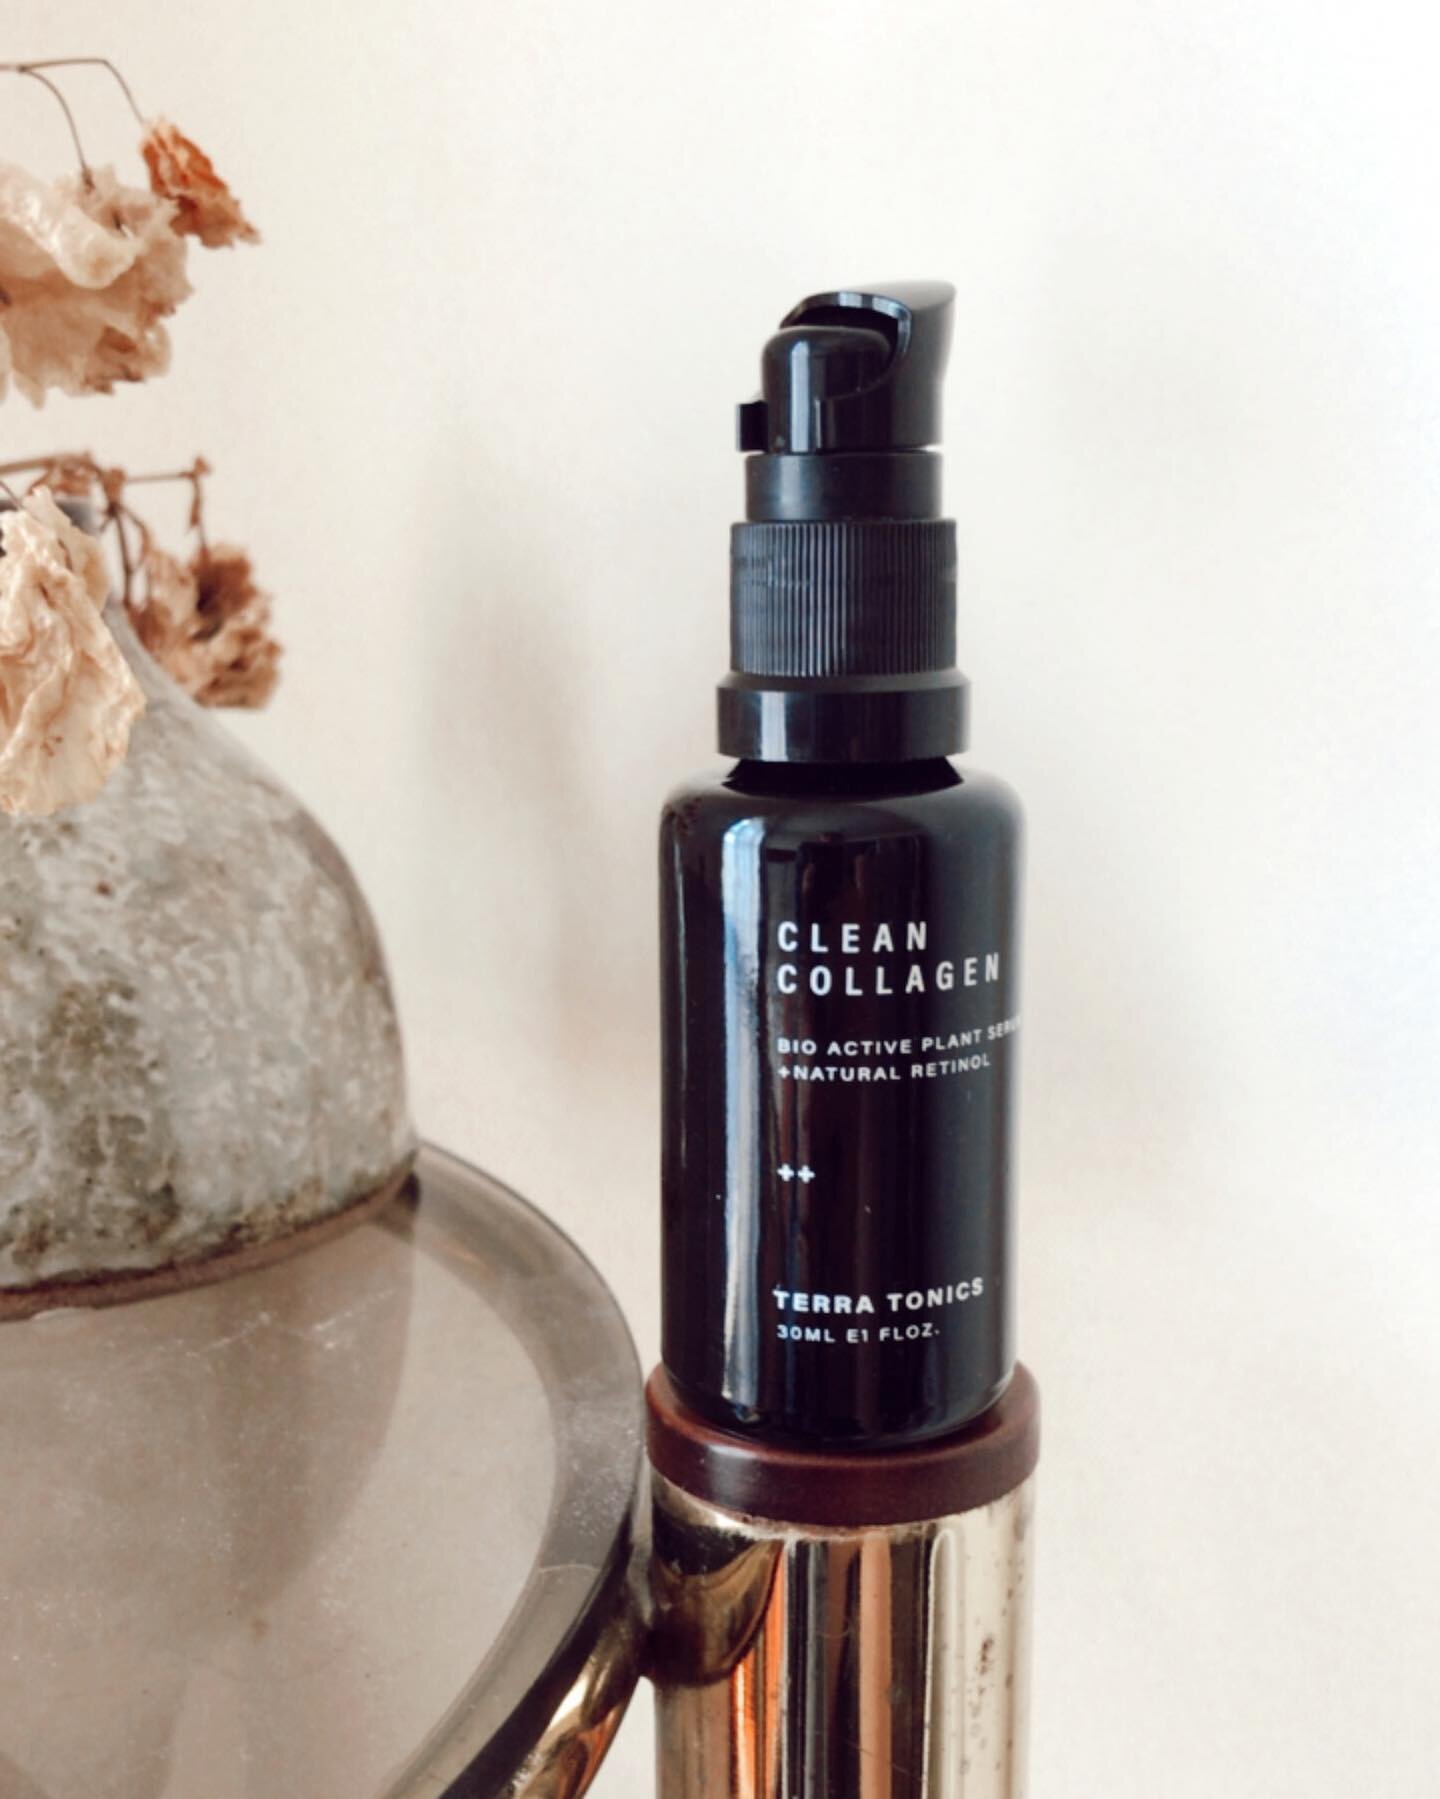 Been using @terratonics plant-based collagen serum lately and loving it 🤍
We love this beautiful Melbourne brand&rsquo;s conscious ethos, in their creation of luxurious skincare that considers people, animals + planet.

&ldquo;Now more than ever, we